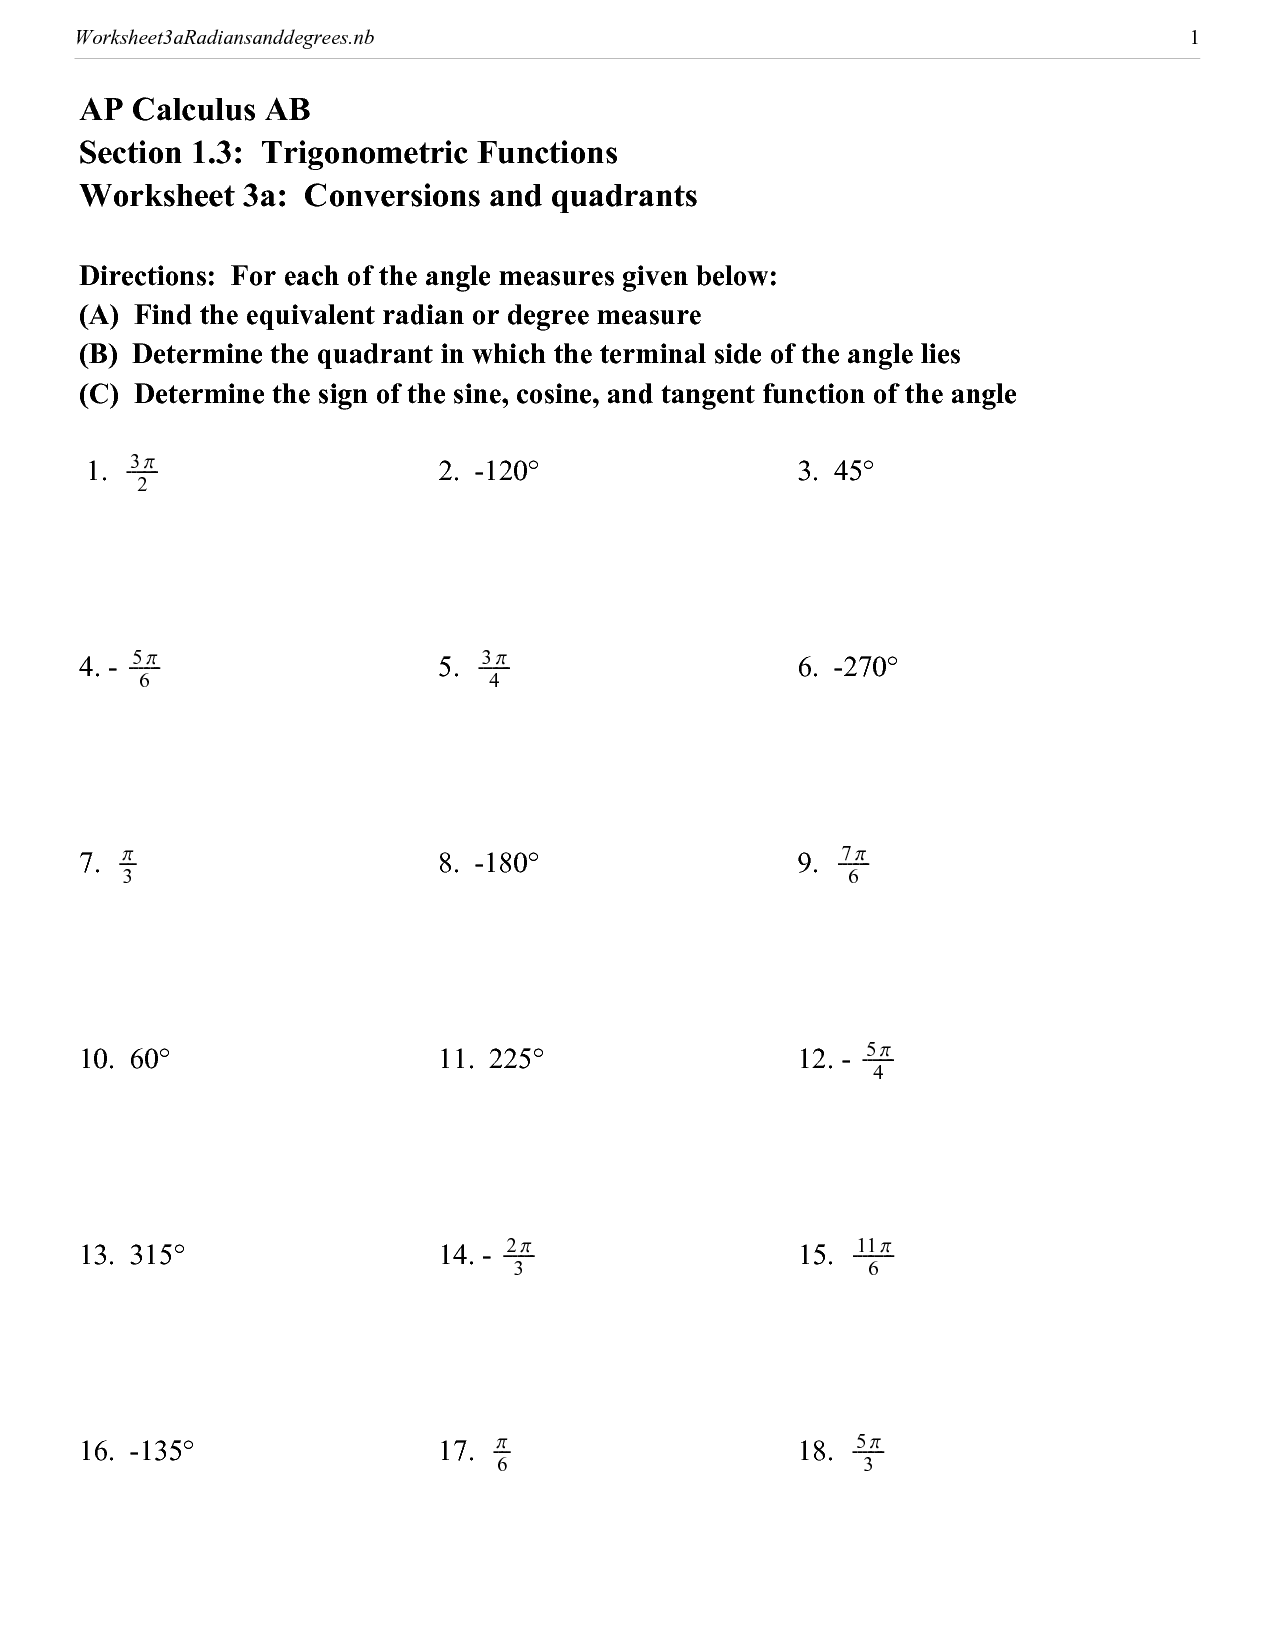 Trigonometric Functions Worksheet With Answers Pdf